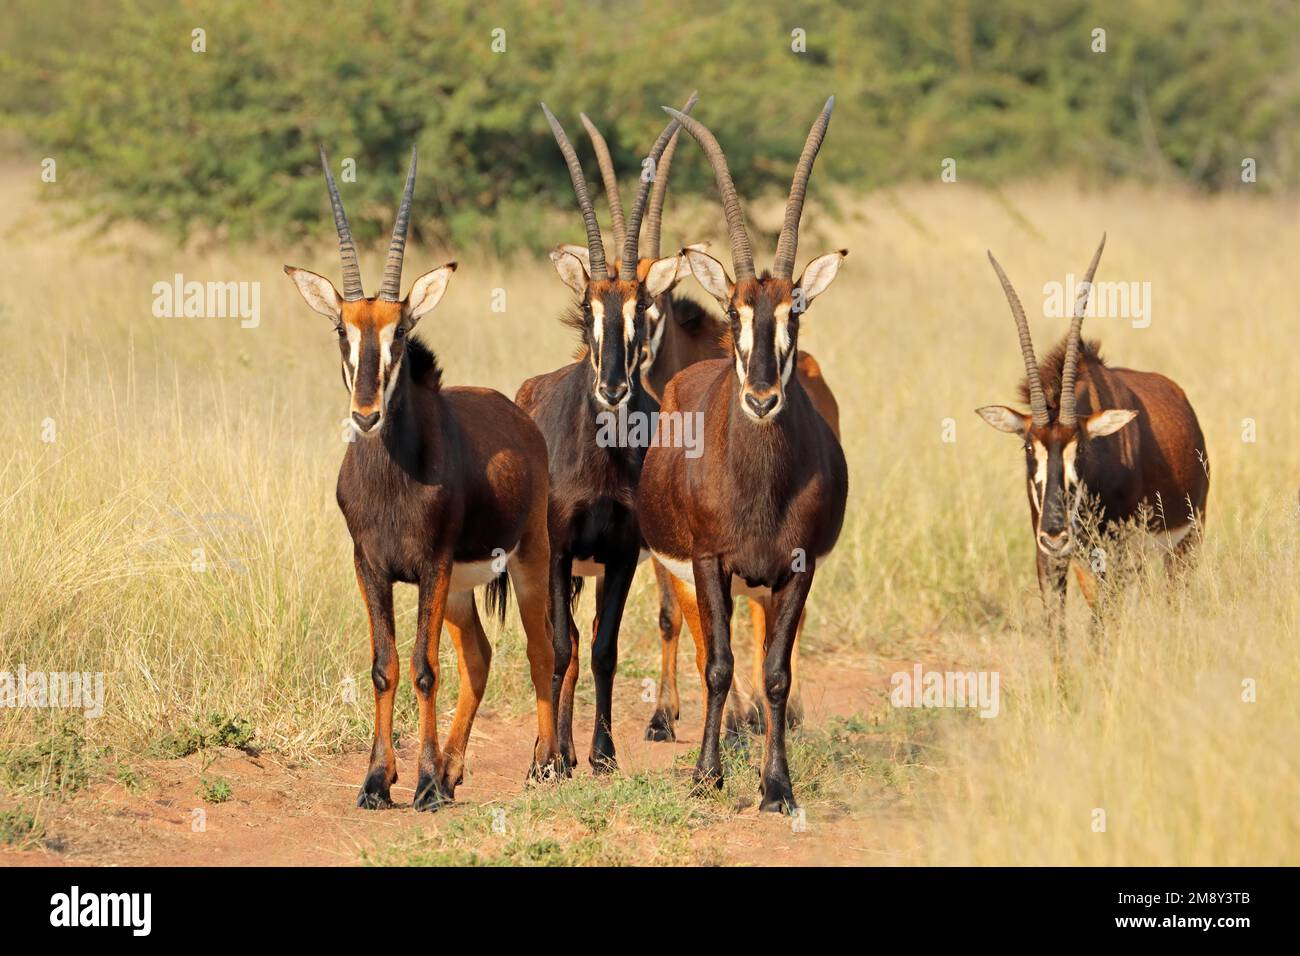 A group of sable antelopes (Hippotragus niger) in natural habitat, South Africa Stock Photo